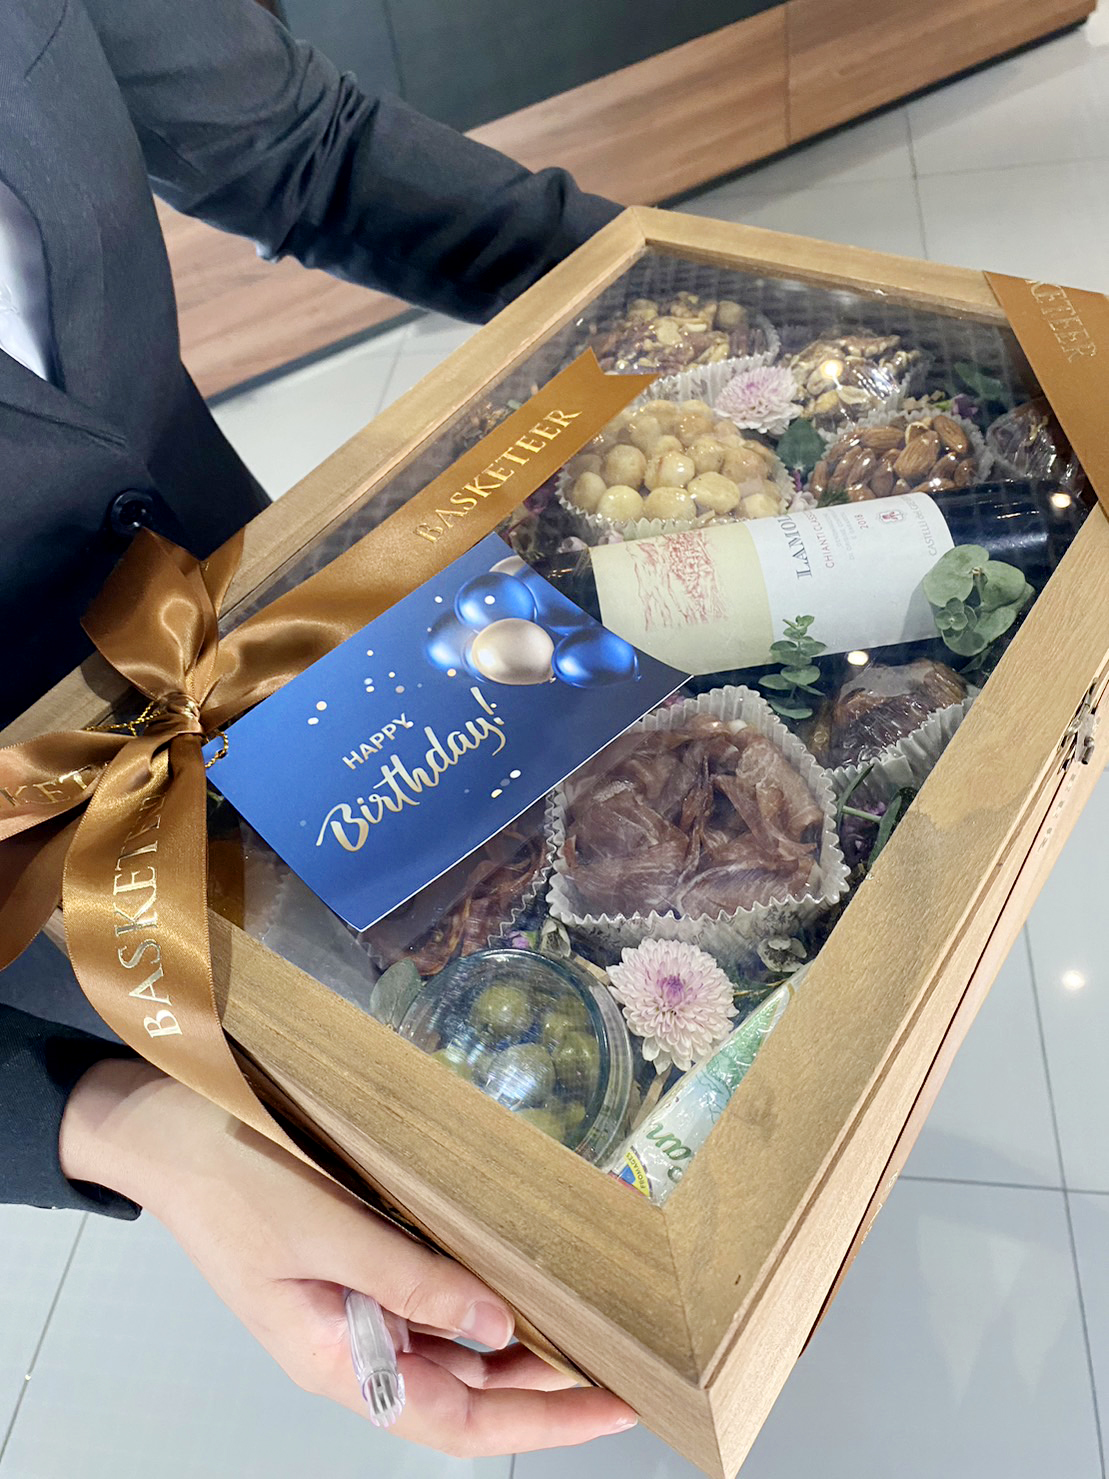 Wine With Mixed Nuts and Cheese In The Wooden Box Gift